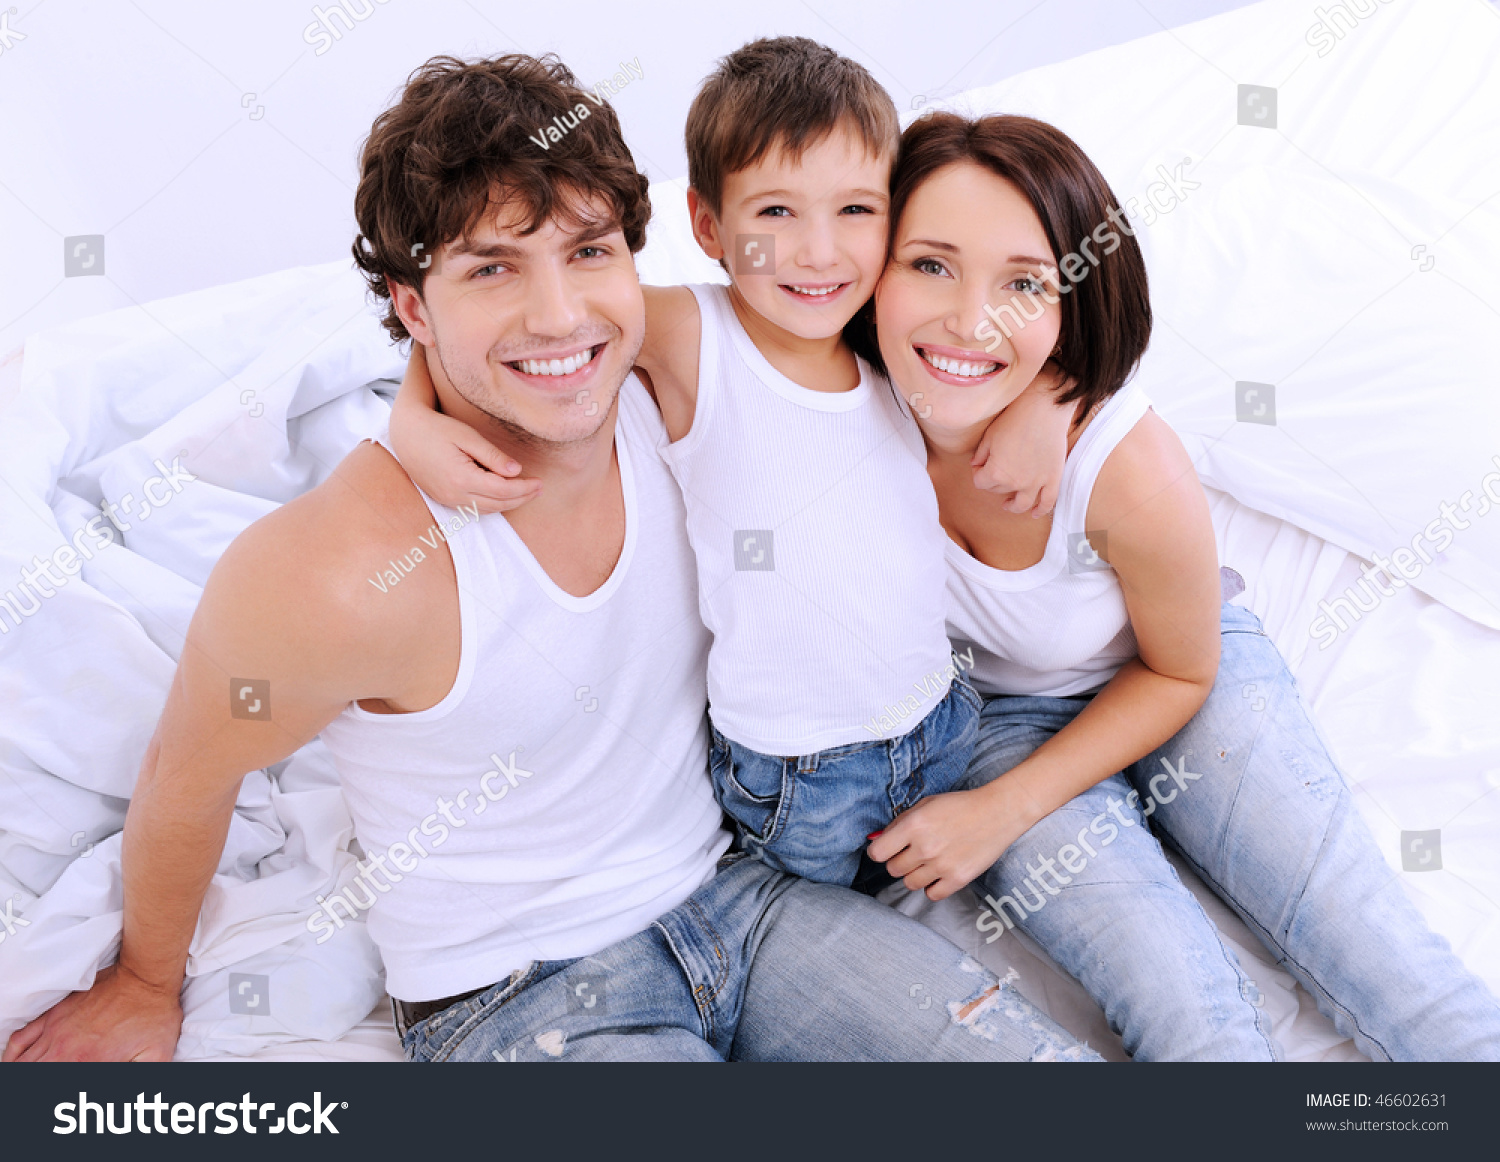 http://image.shutterstock.com/z/stock-photo-high-angle-portrait-of-the-happy-parents-with-little-child-sitting-on-a-bed-46602631.jpg